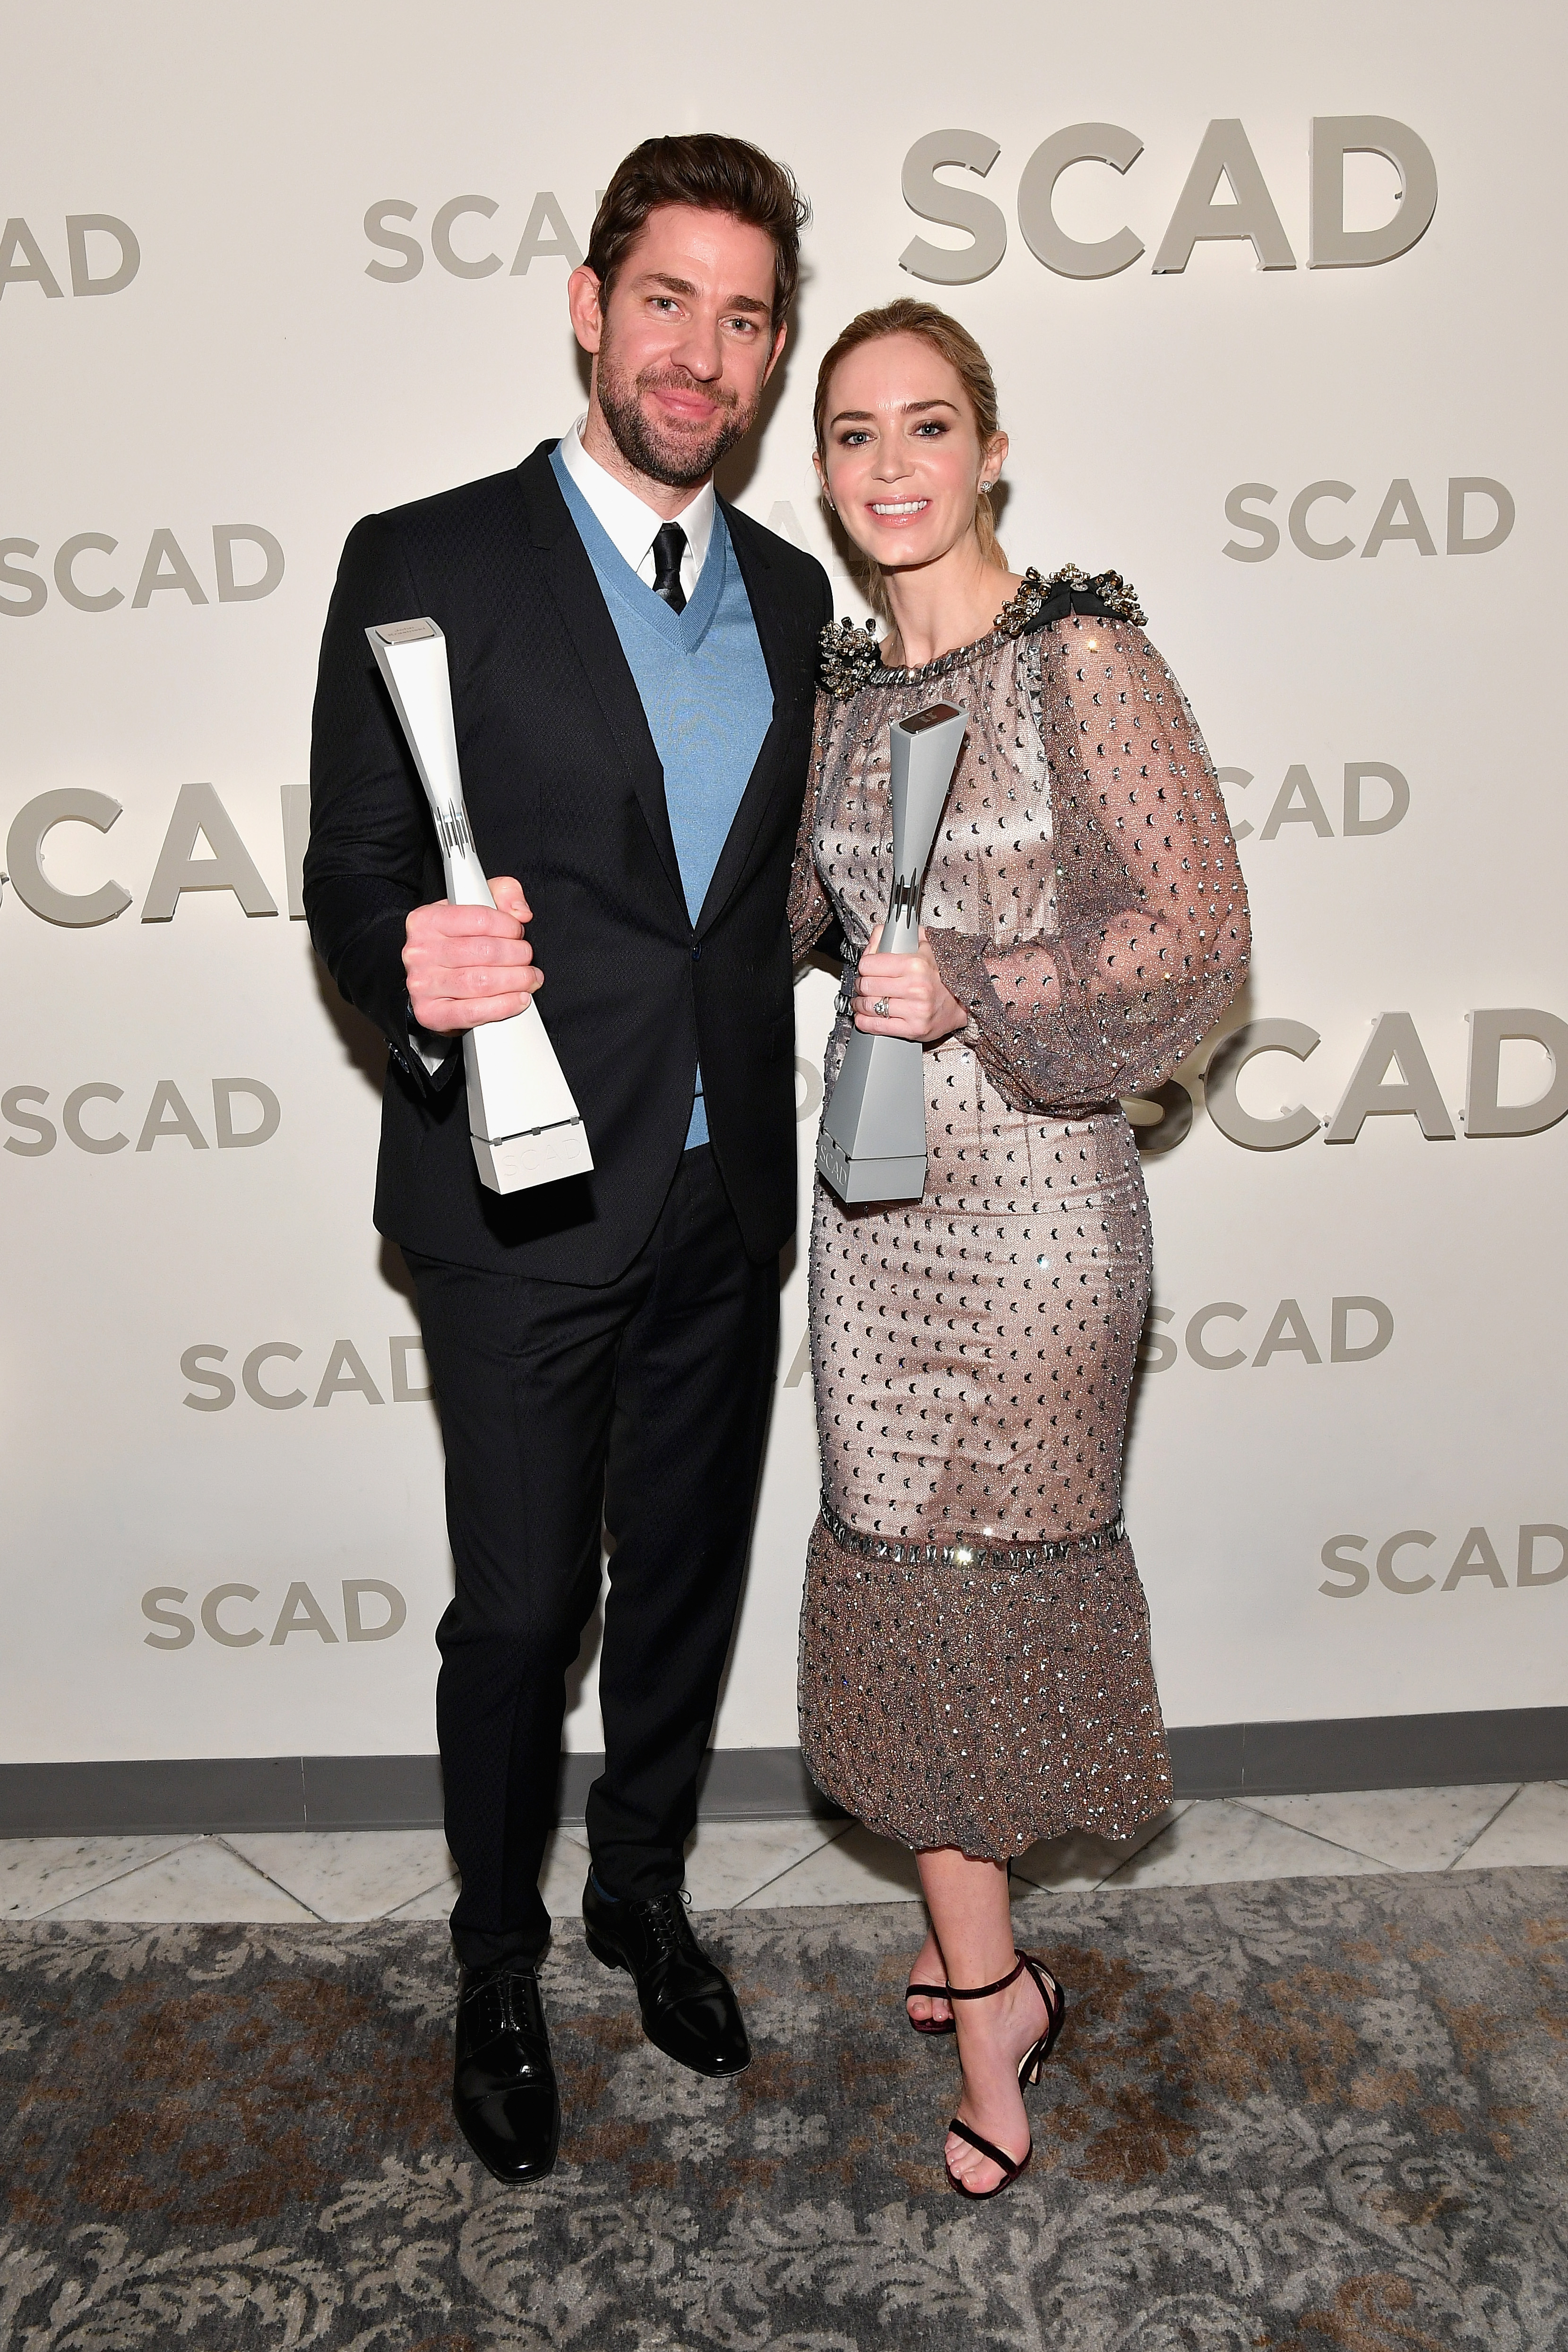 John Krasinski and Emily Blunt attend the "A Quiet Place" award presentation and screening at the 21st SCAD Savannah Film Festival in Savannah, Georgia, on October 27, 2018. | Source: Getty Images